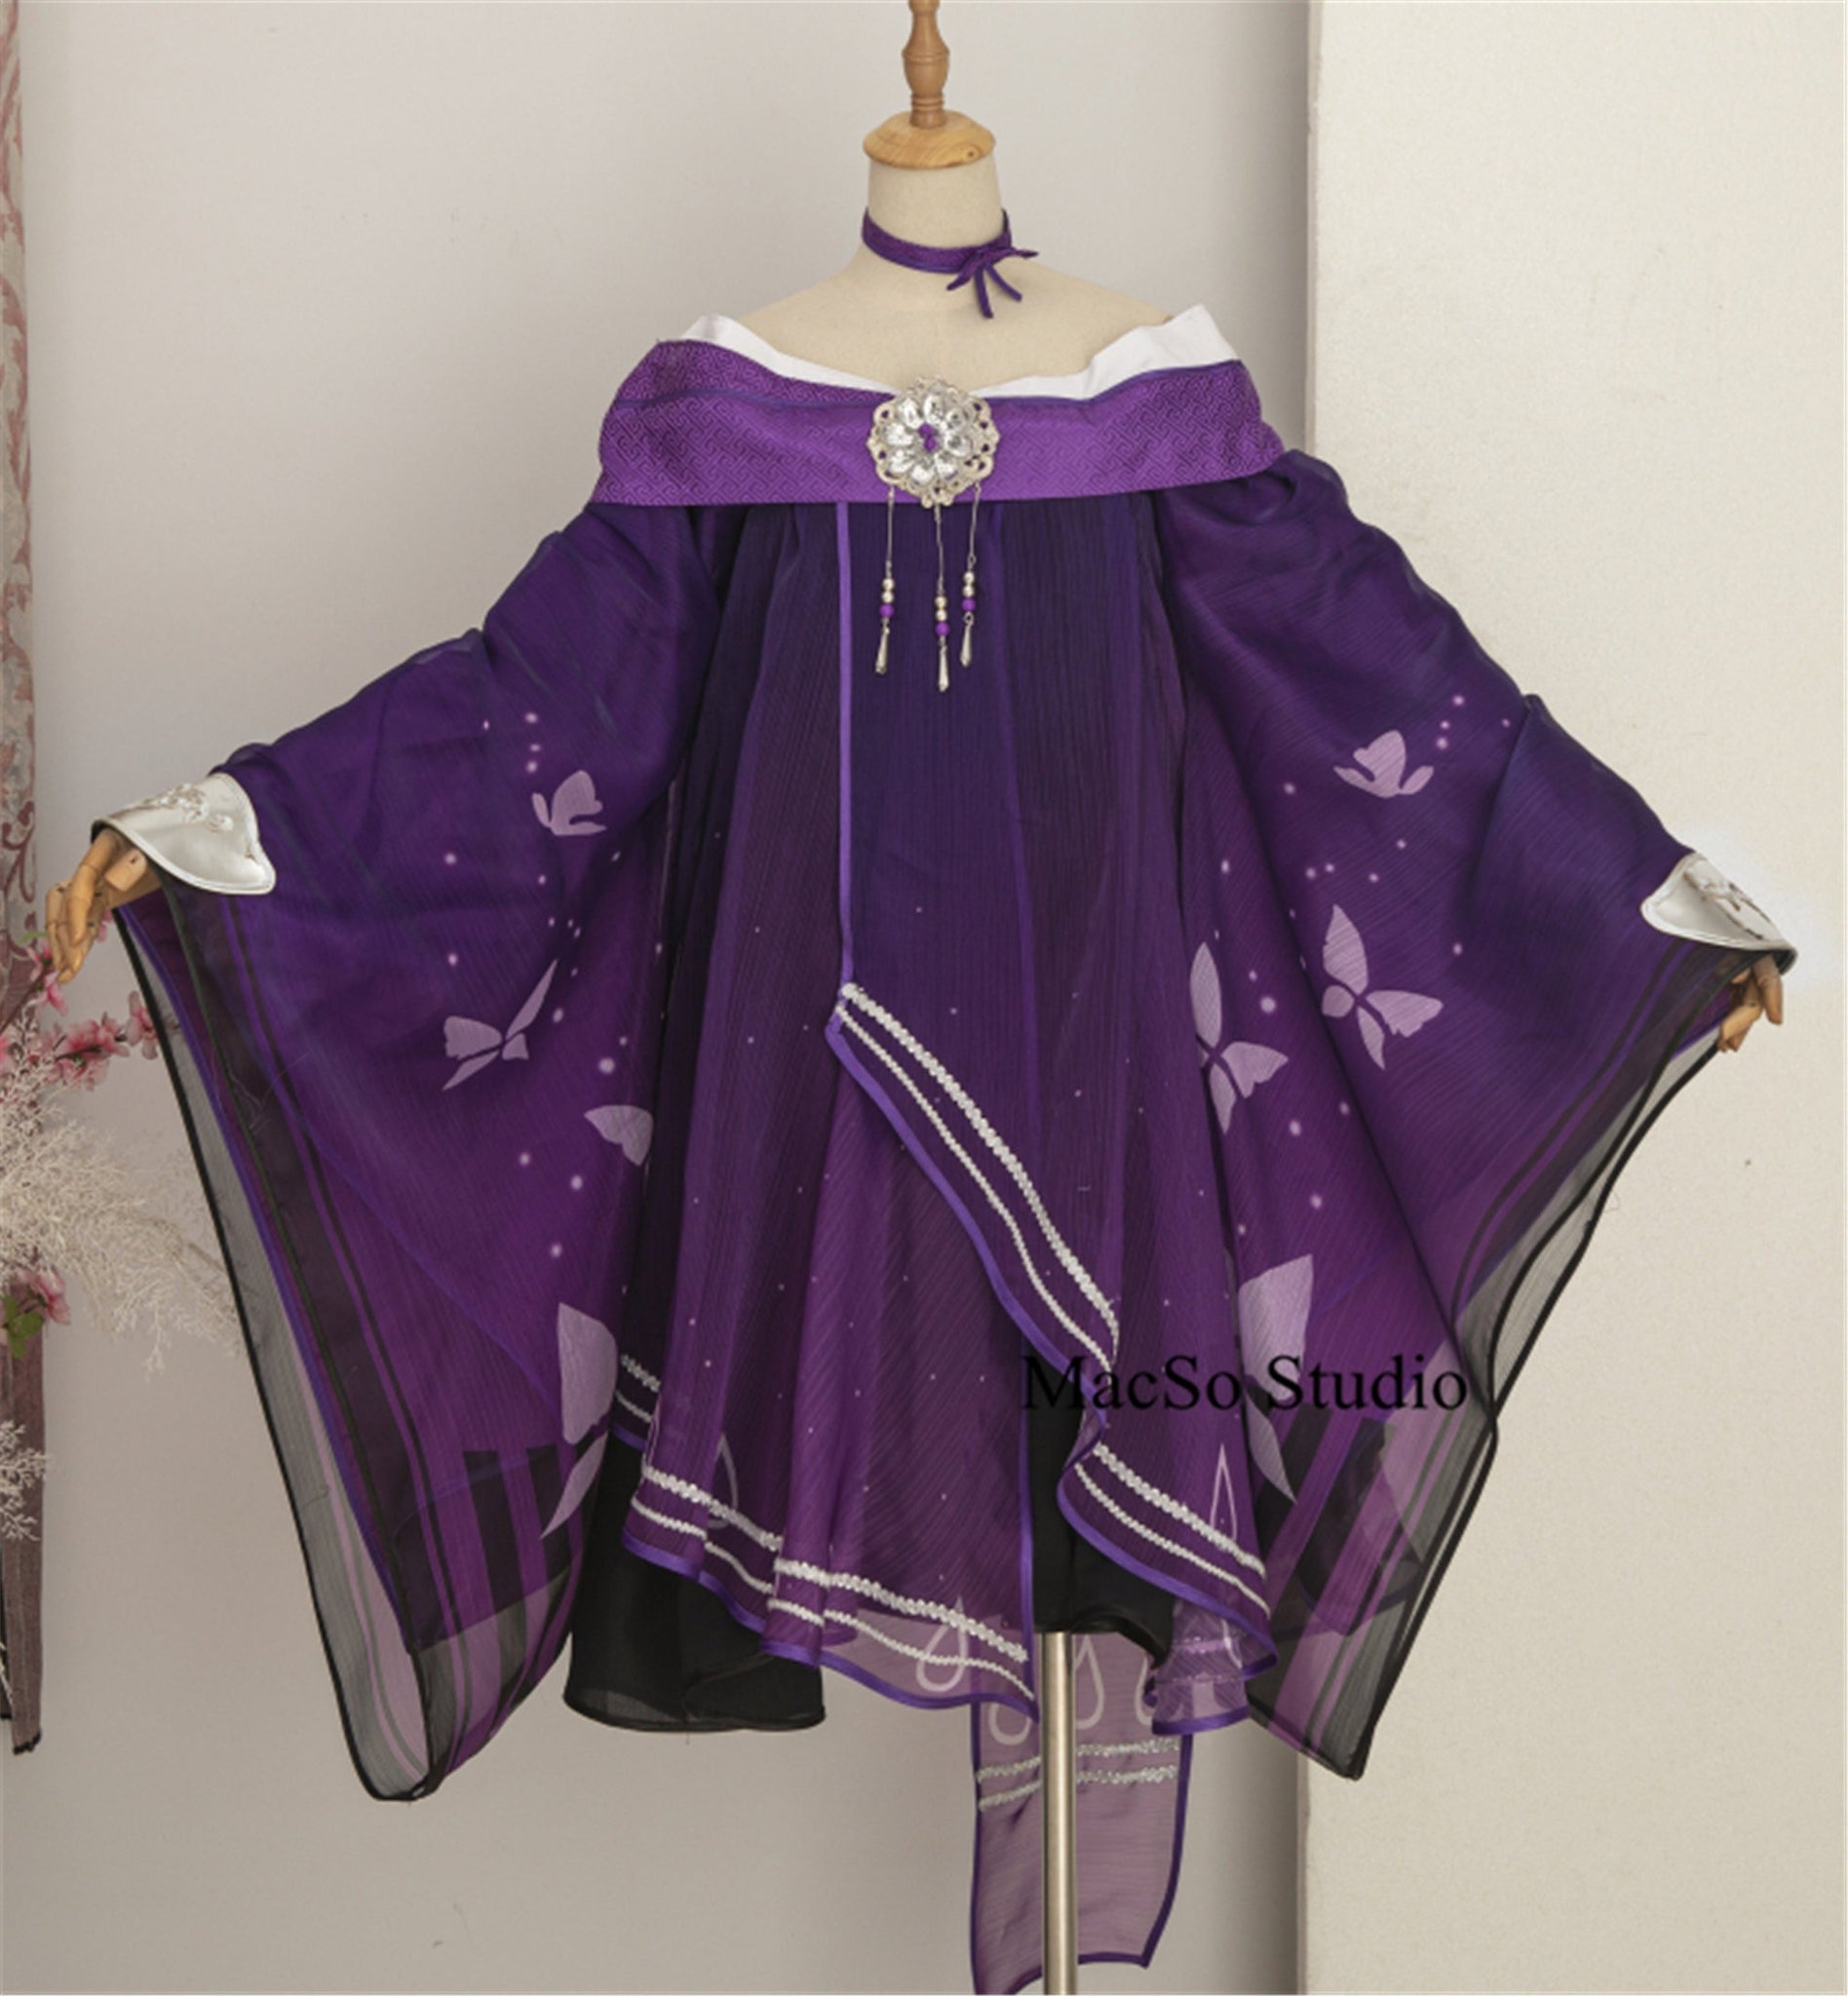 Off shoulder Chiffon Purple Top Girls Cosplay Dramatic Top Women Party Girls Cosplay Costume Sexy Cosplay Top